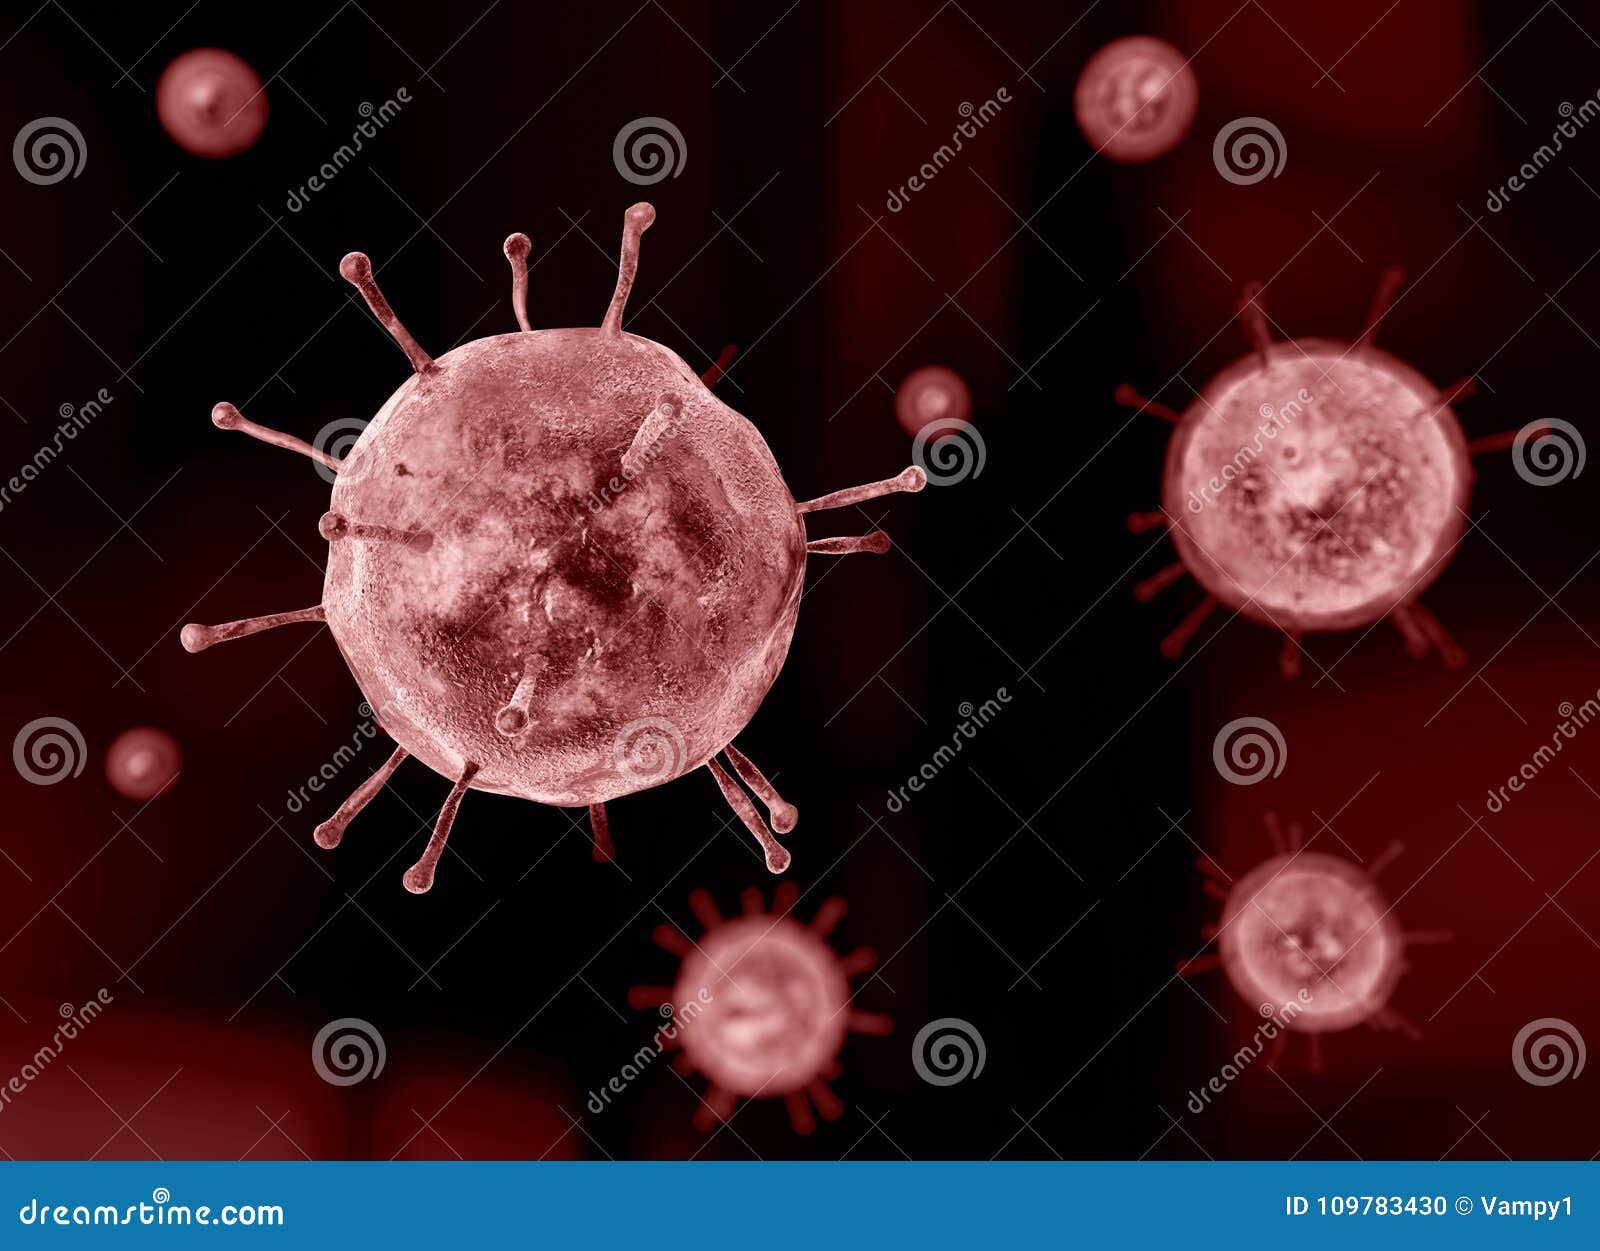 virus, flu, view of a virus under a microscope, infectious disease